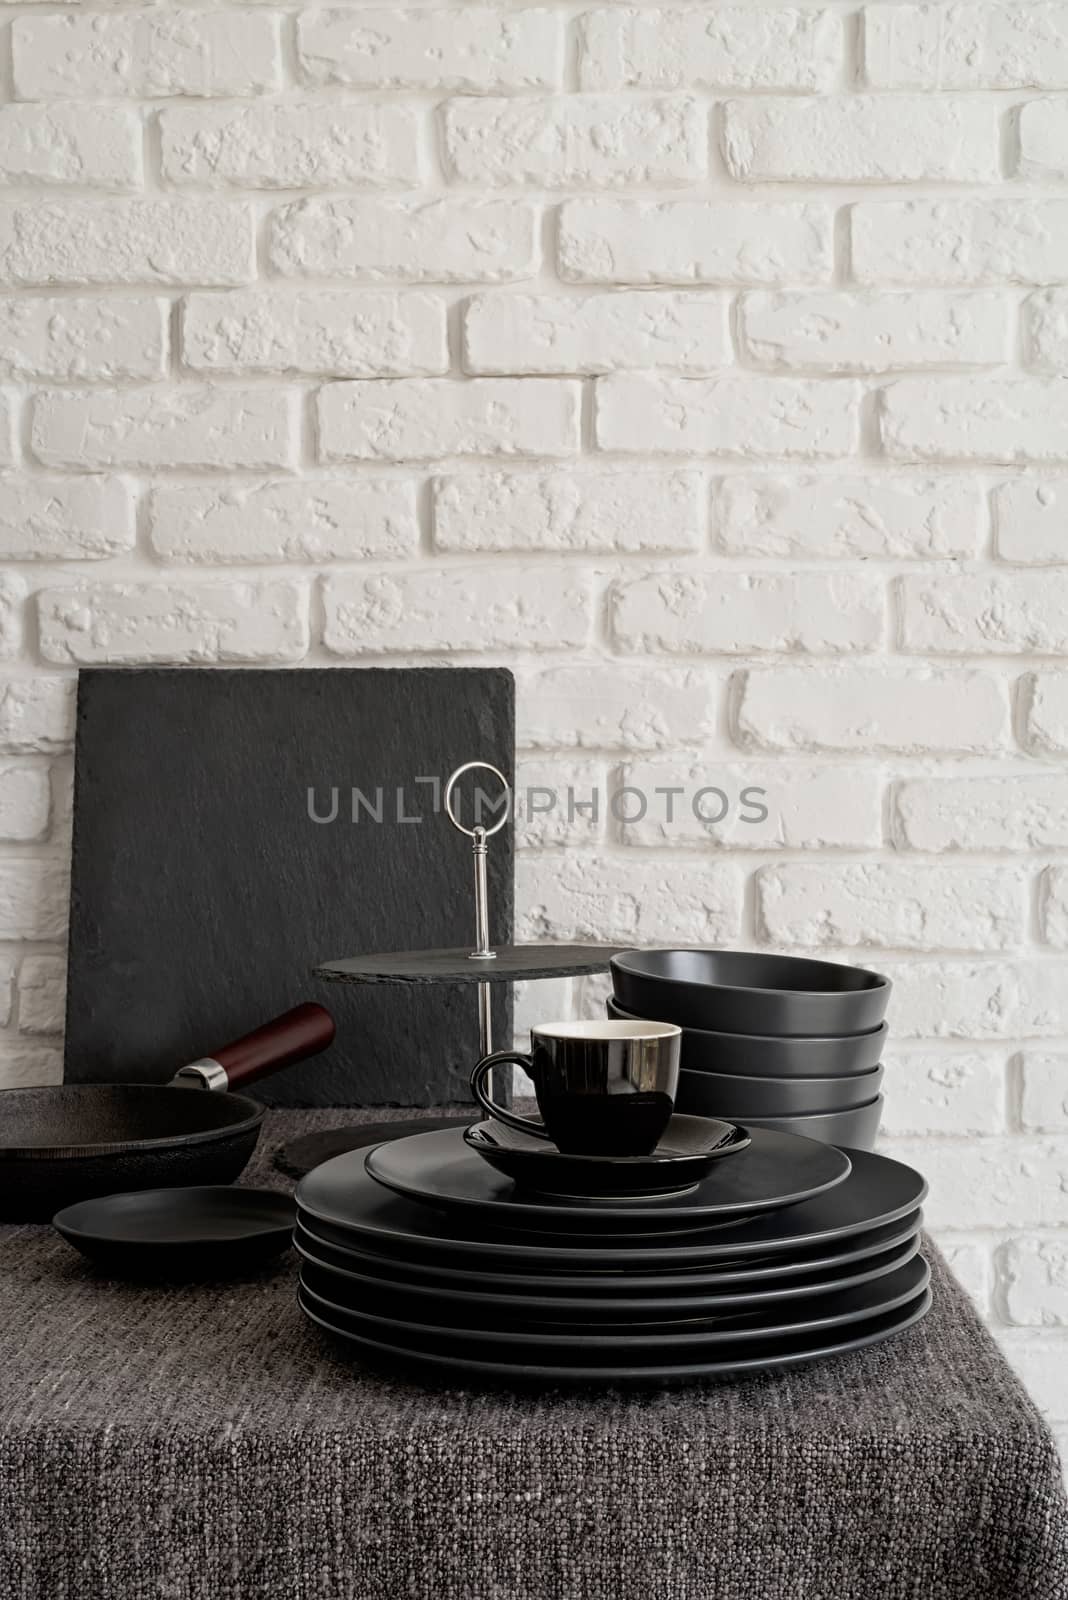 stack of black ceramic dishes and tableware on the table on white brick wall background with copy space